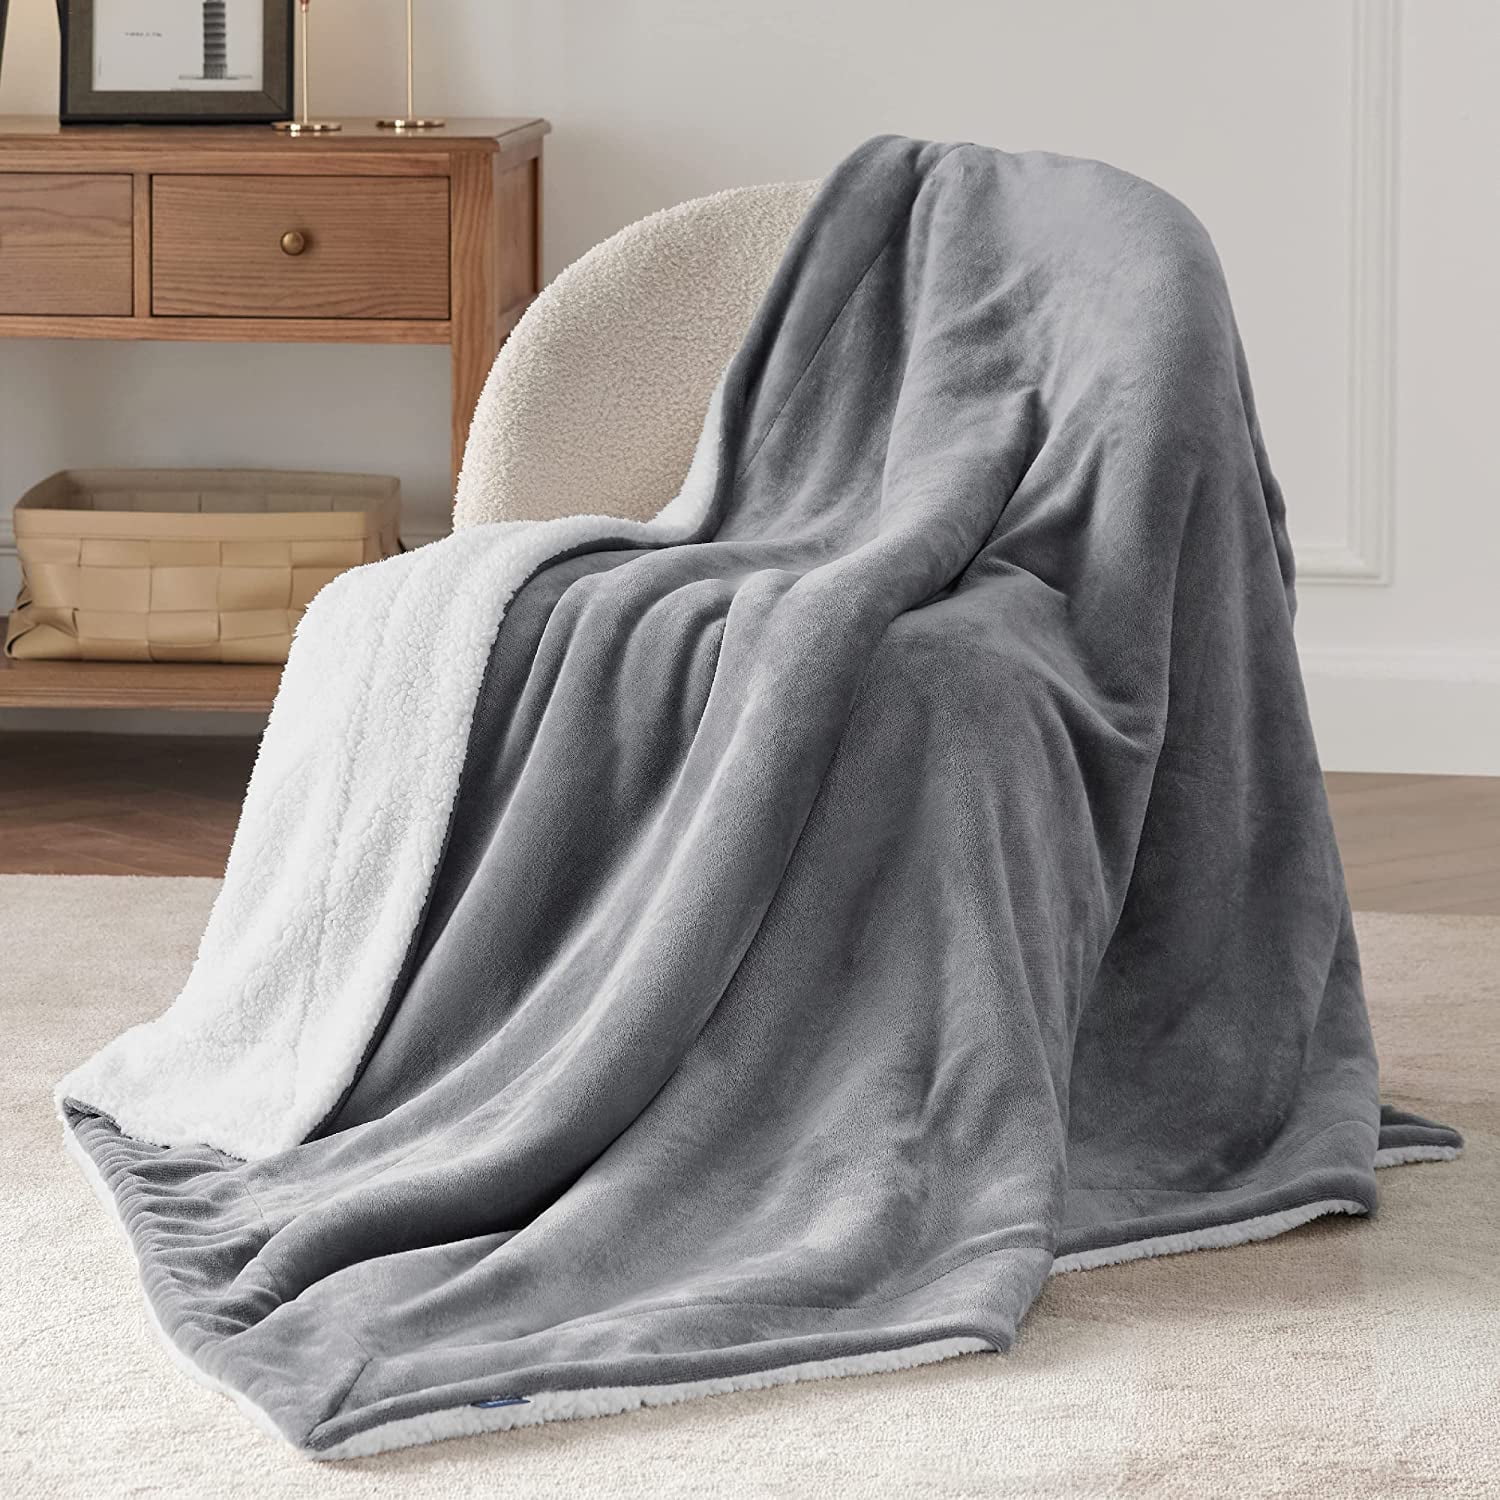 Bedsure Sherpa Fleece Throw Blanket - Thick and Warm Blankets Soft